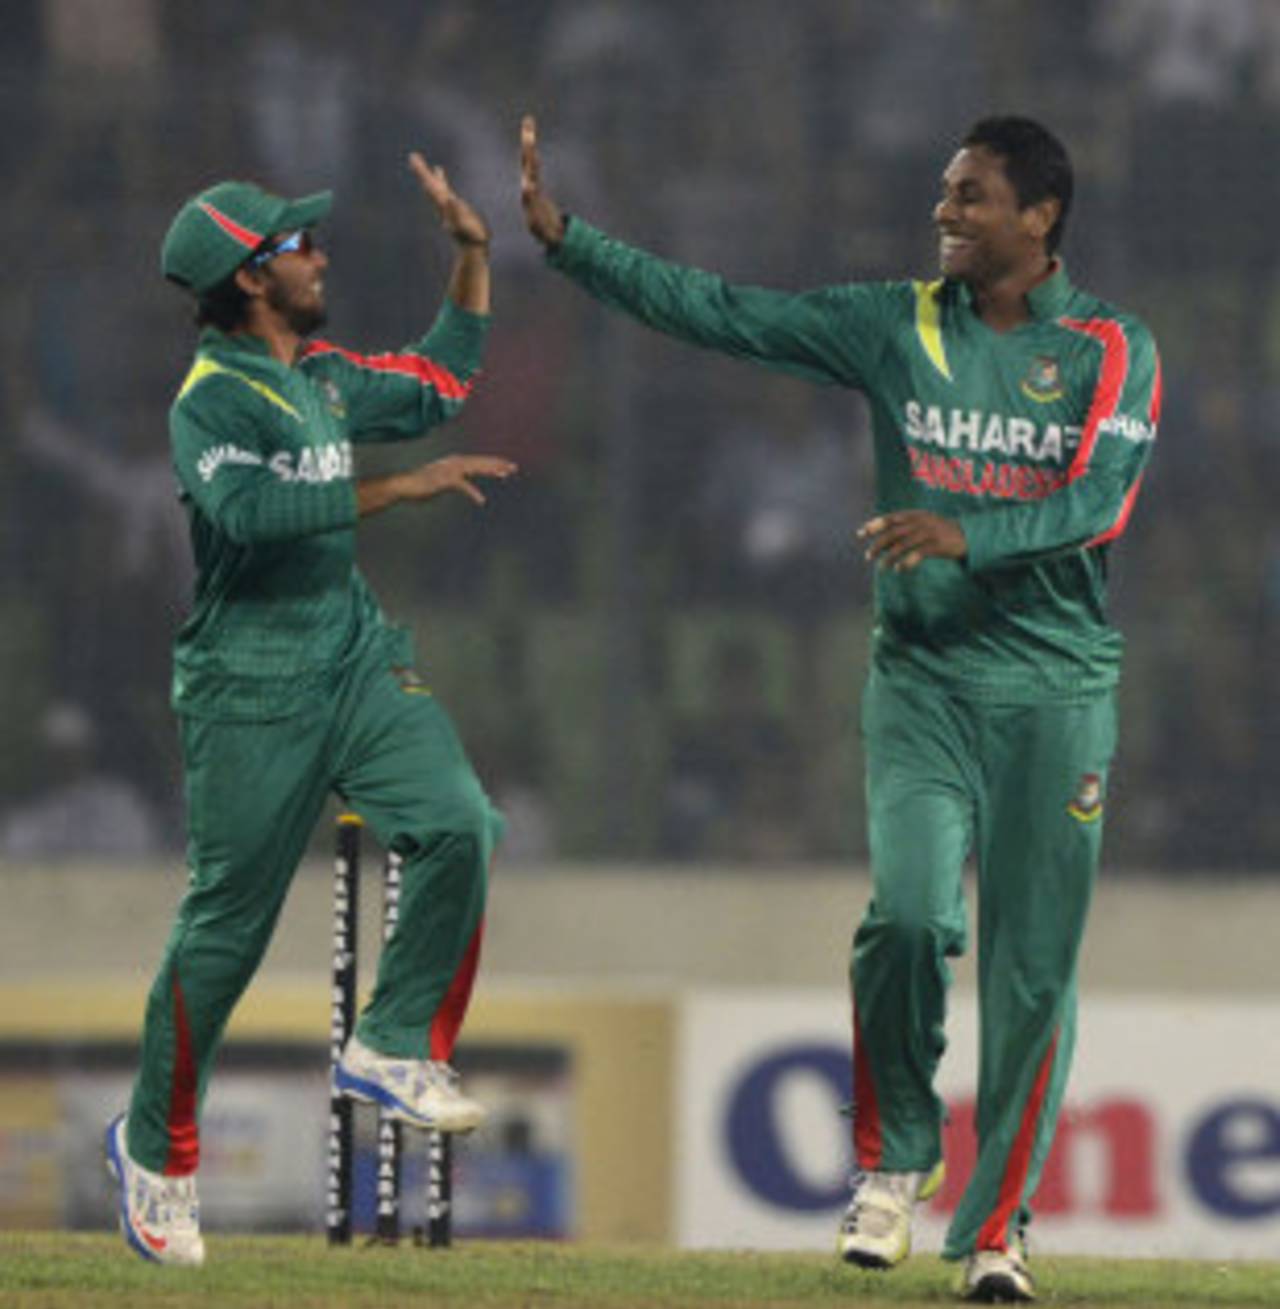 Sohag Gazi snatched three wickets and scored a 24-ball 26 on Thursday to secure the win and series for Bangladesh&nbsp;&nbsp;&bull;&nbsp;&nbsp;AFP